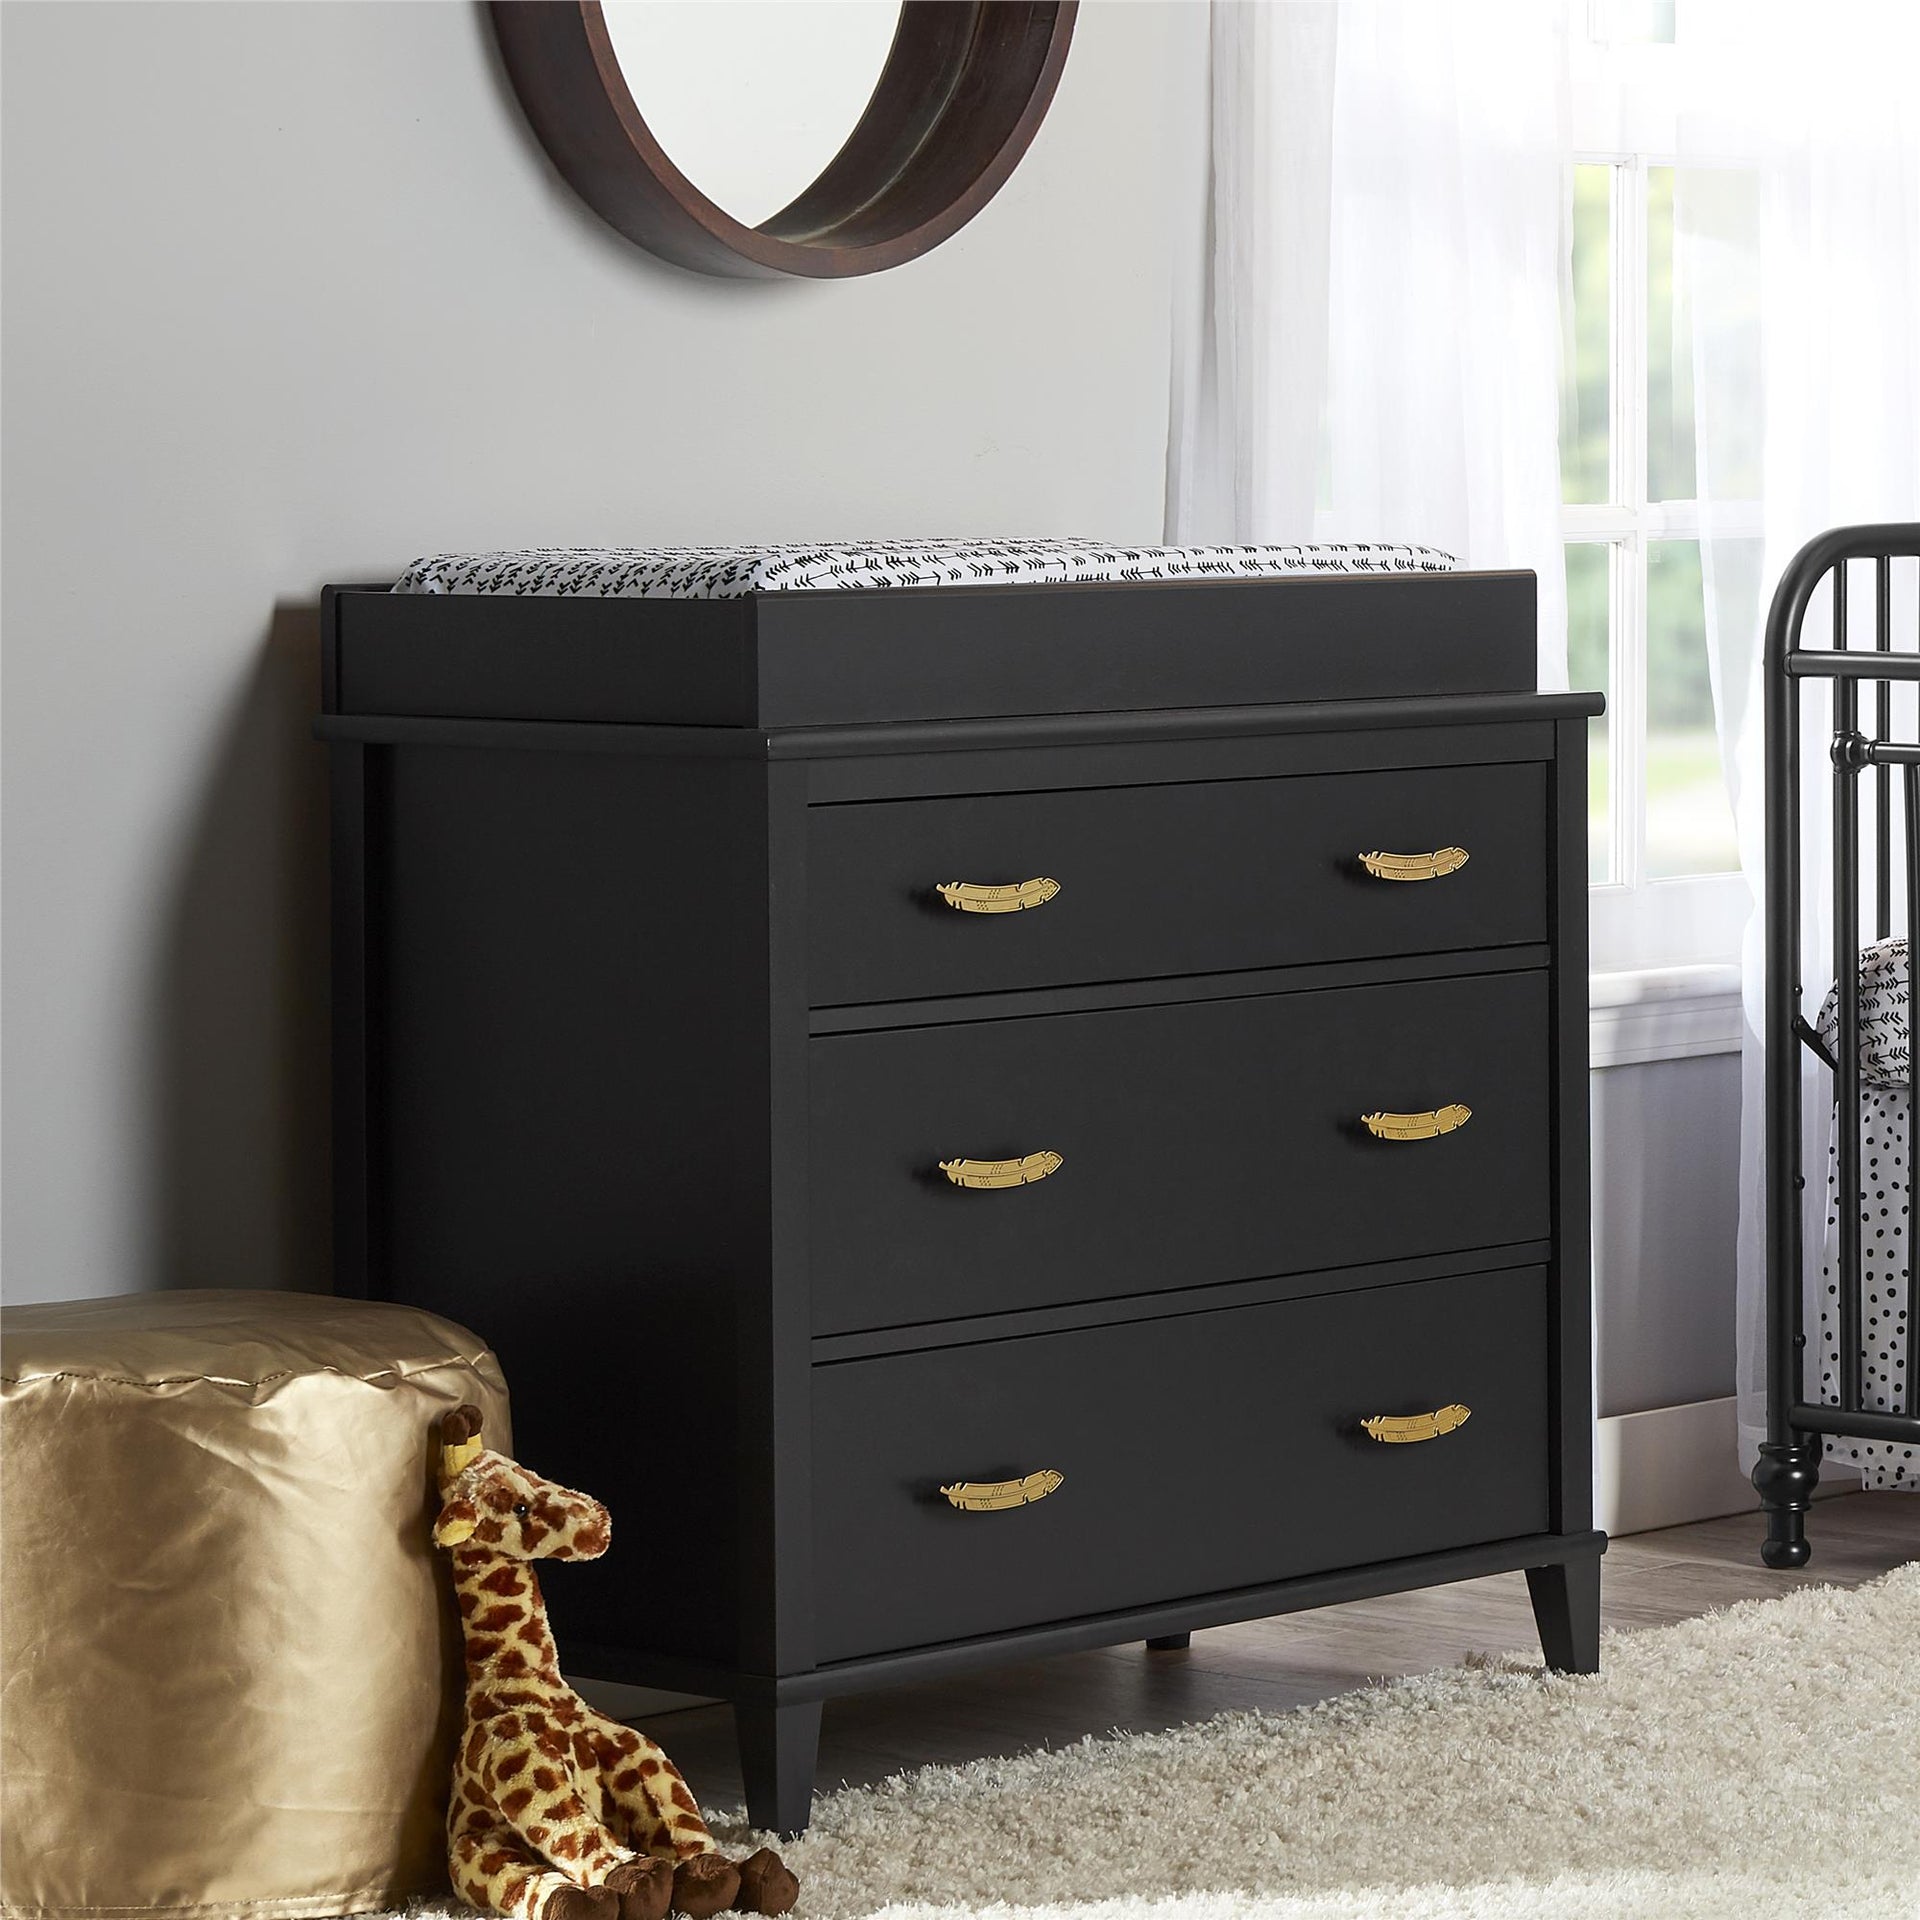 Monarch Hill Hawken Changing Table Topper - Black